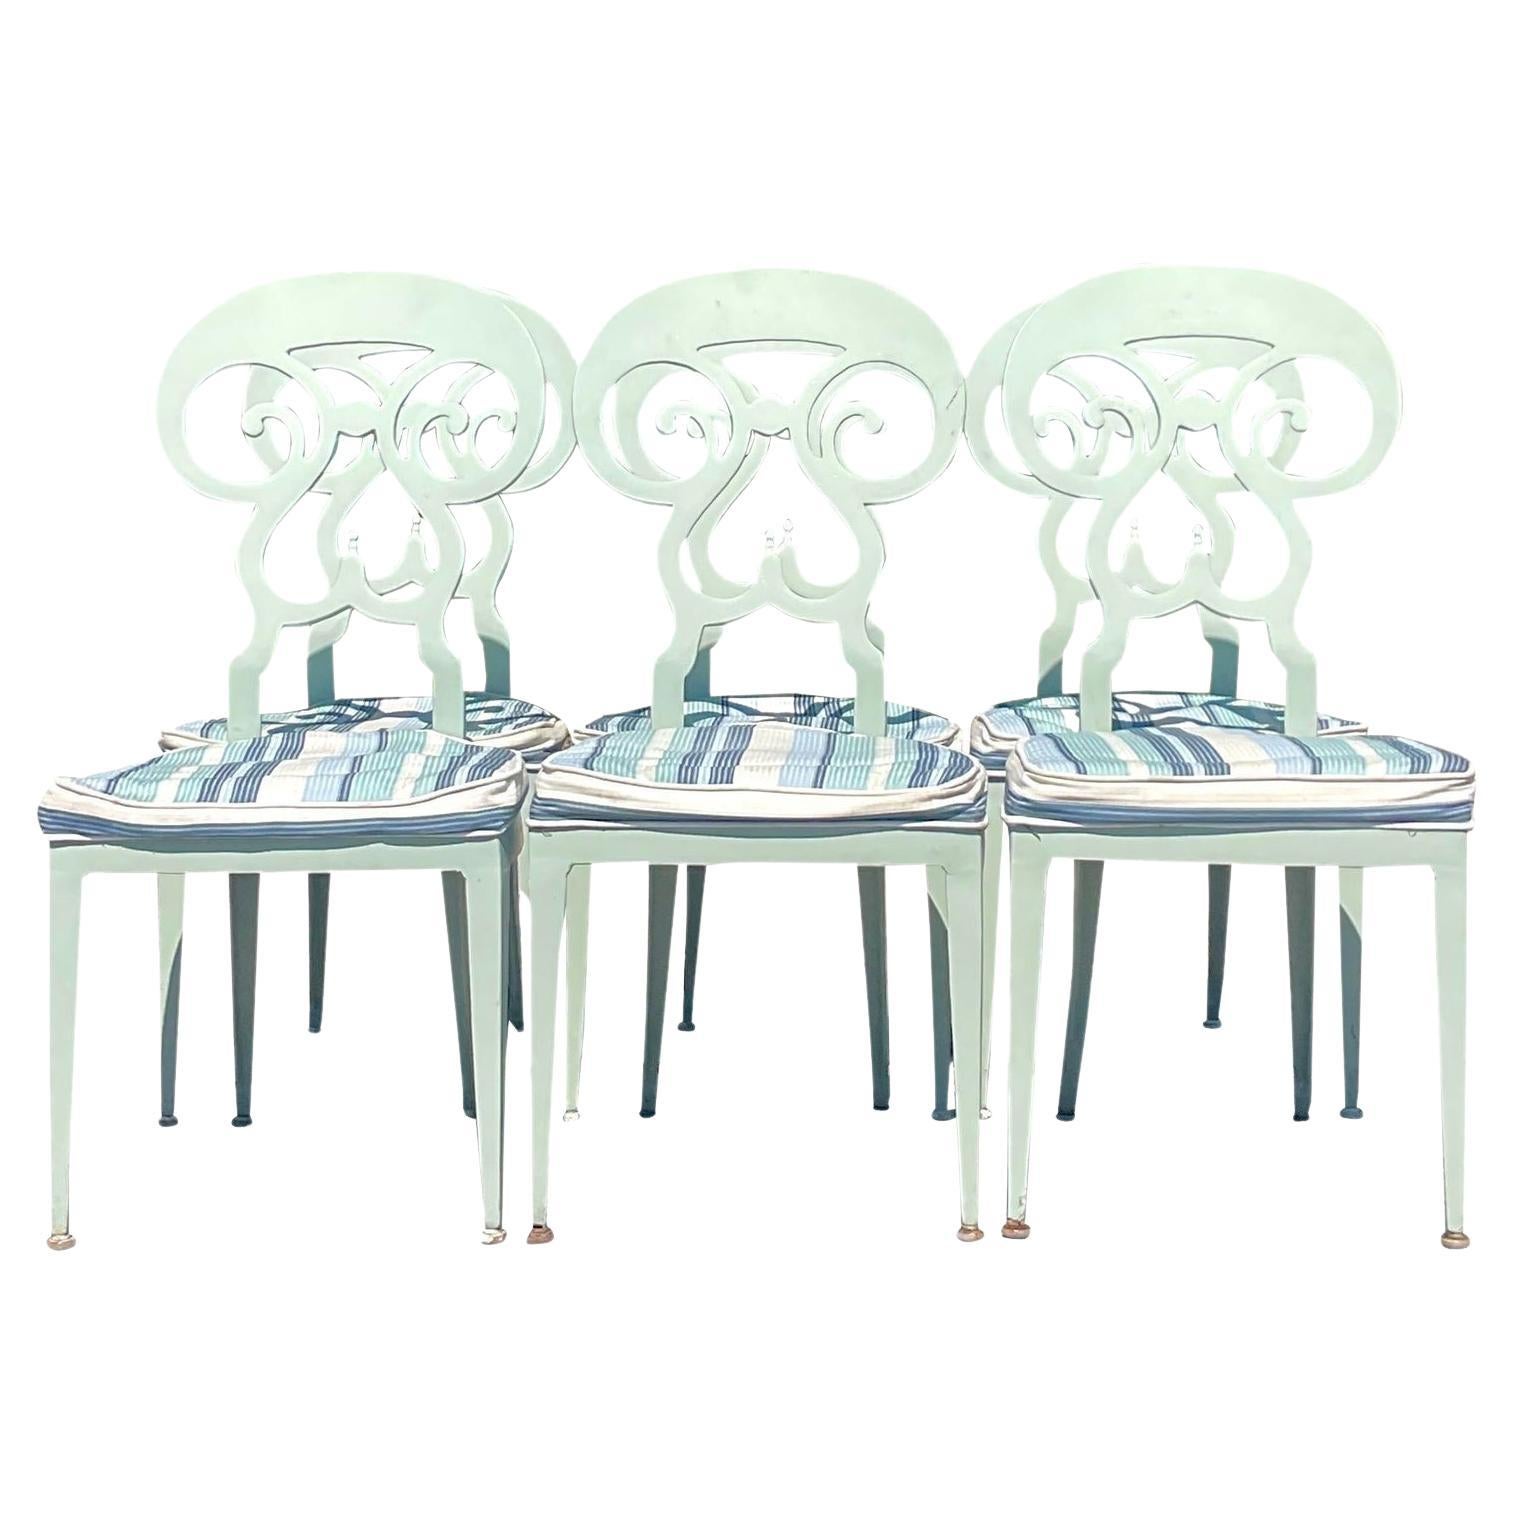 Vintage Boho Metal Scroll Dining Chairs - Set of 6 For Sale